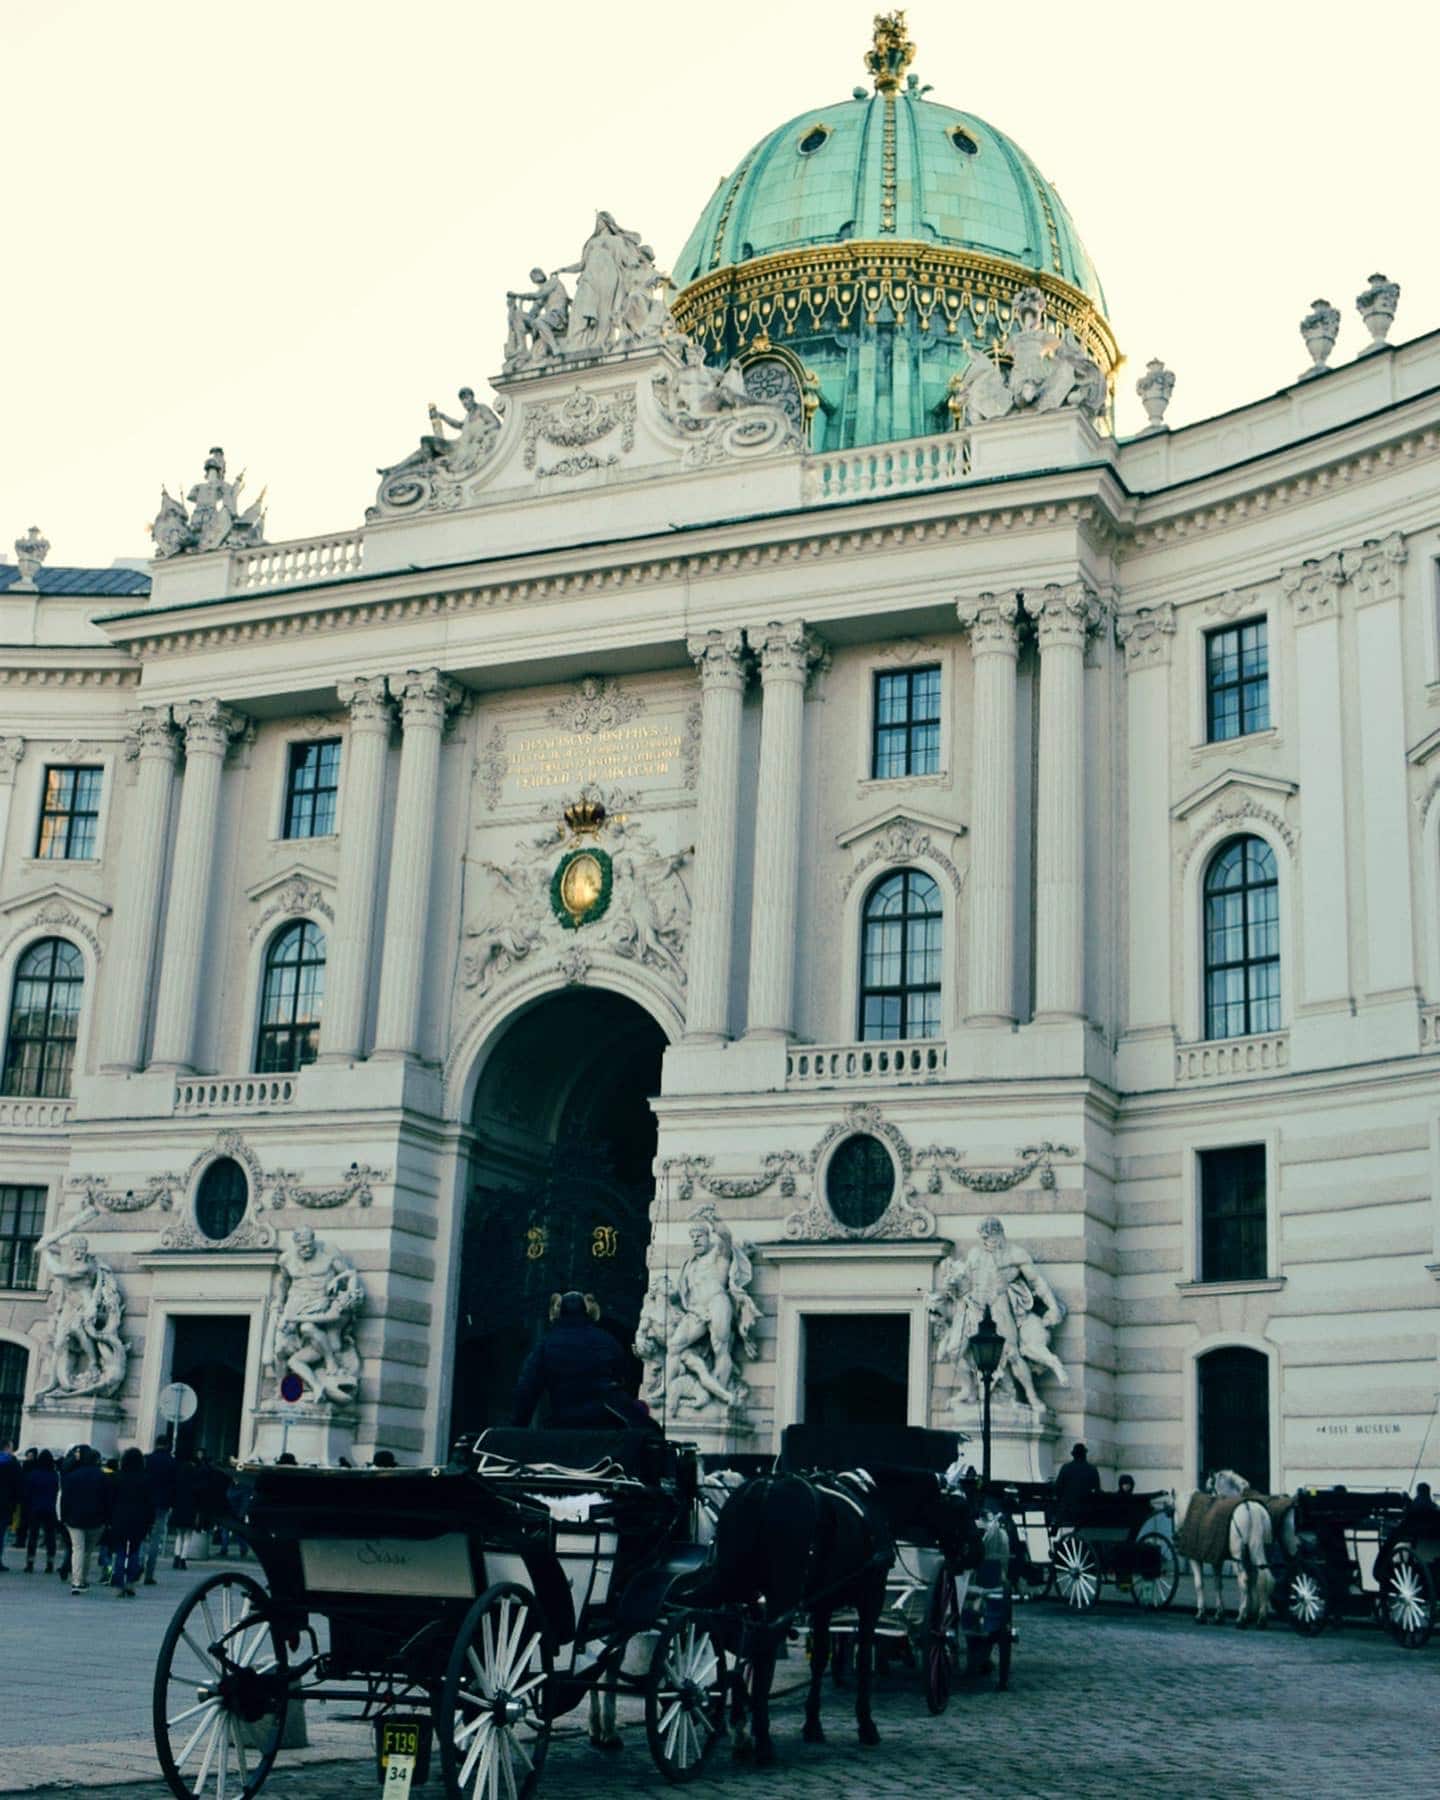 A short visit of old neighbors and new friends – Vienna here we come!